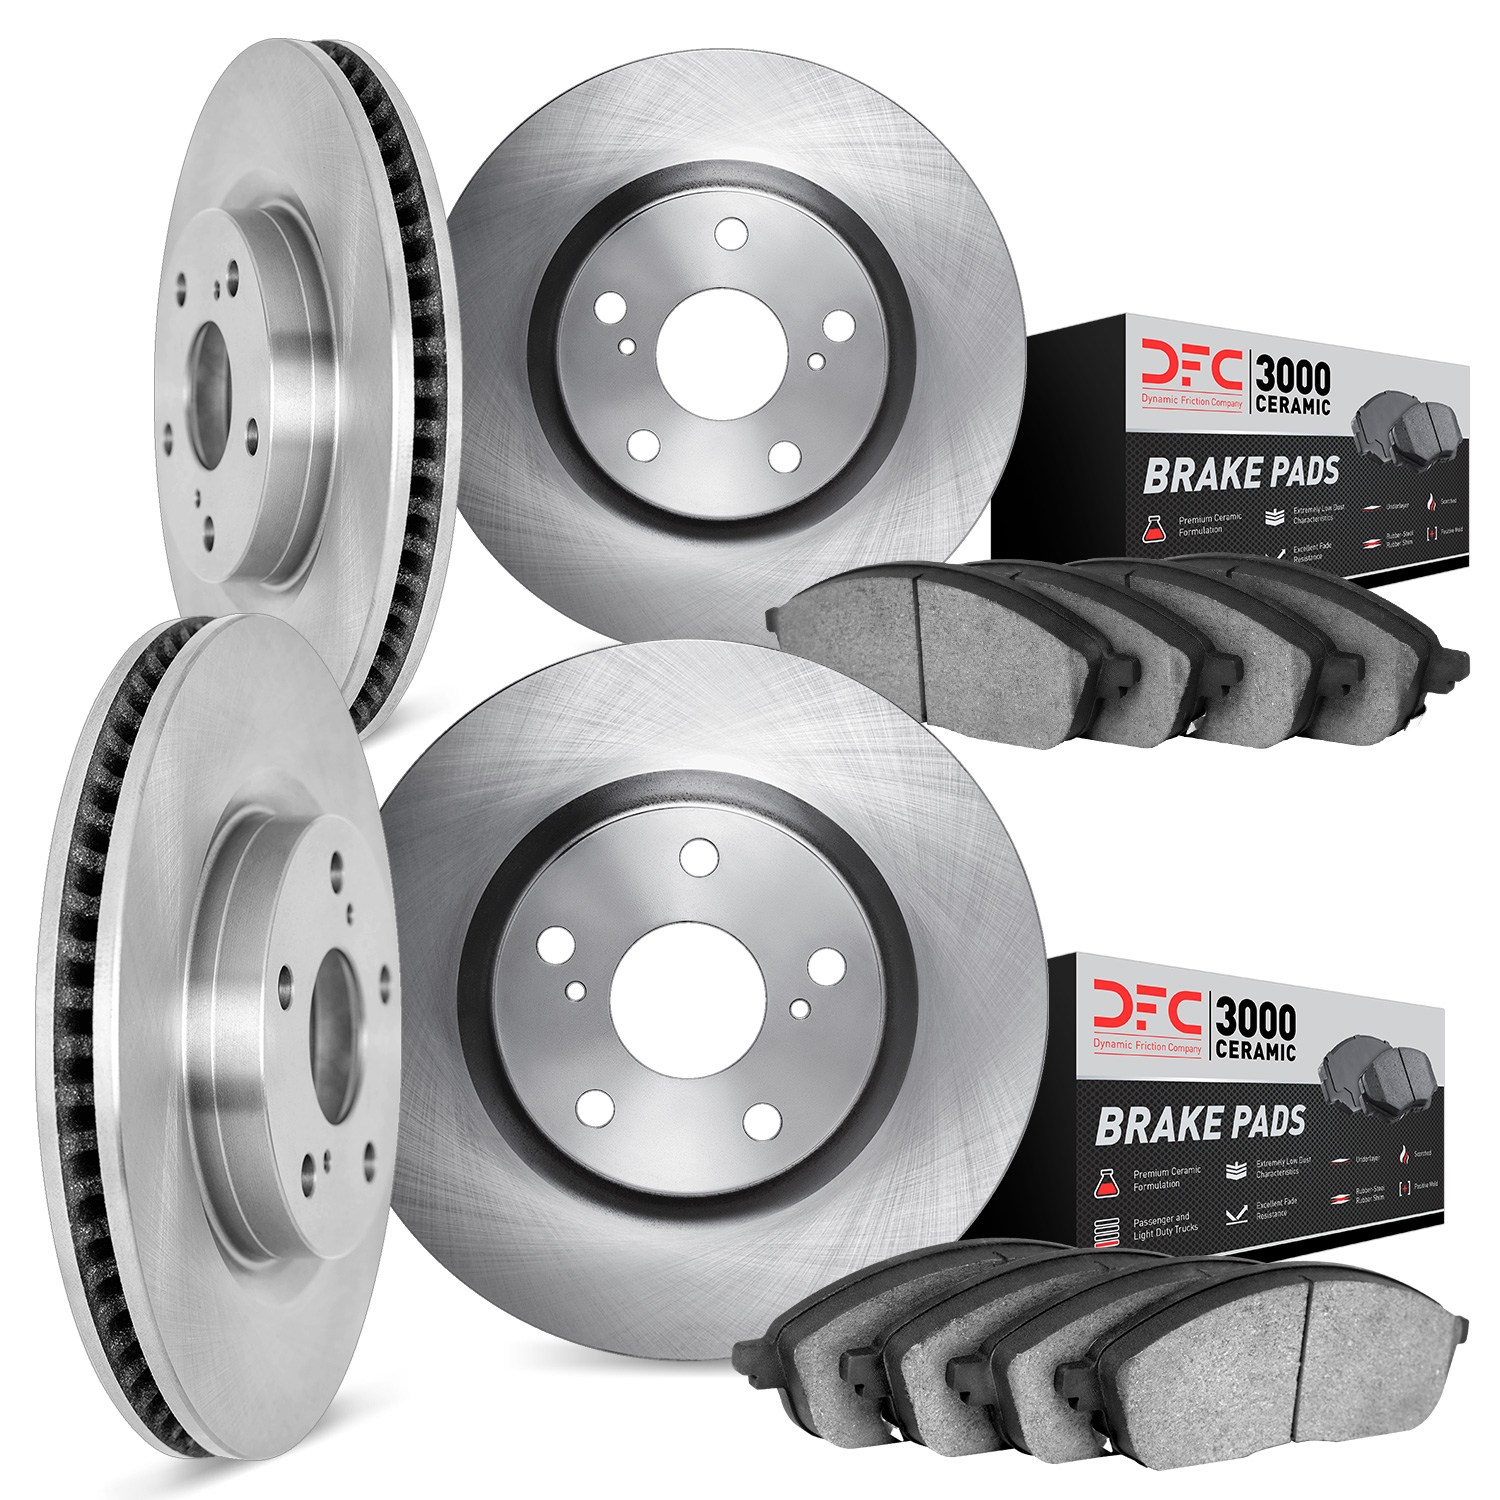 6304-76032 Brake Rotors with 3000-Series Ceramic Brake Pads Kit, 1991-1997 Lexus/Toyota/Scion, Position: Front and Rear